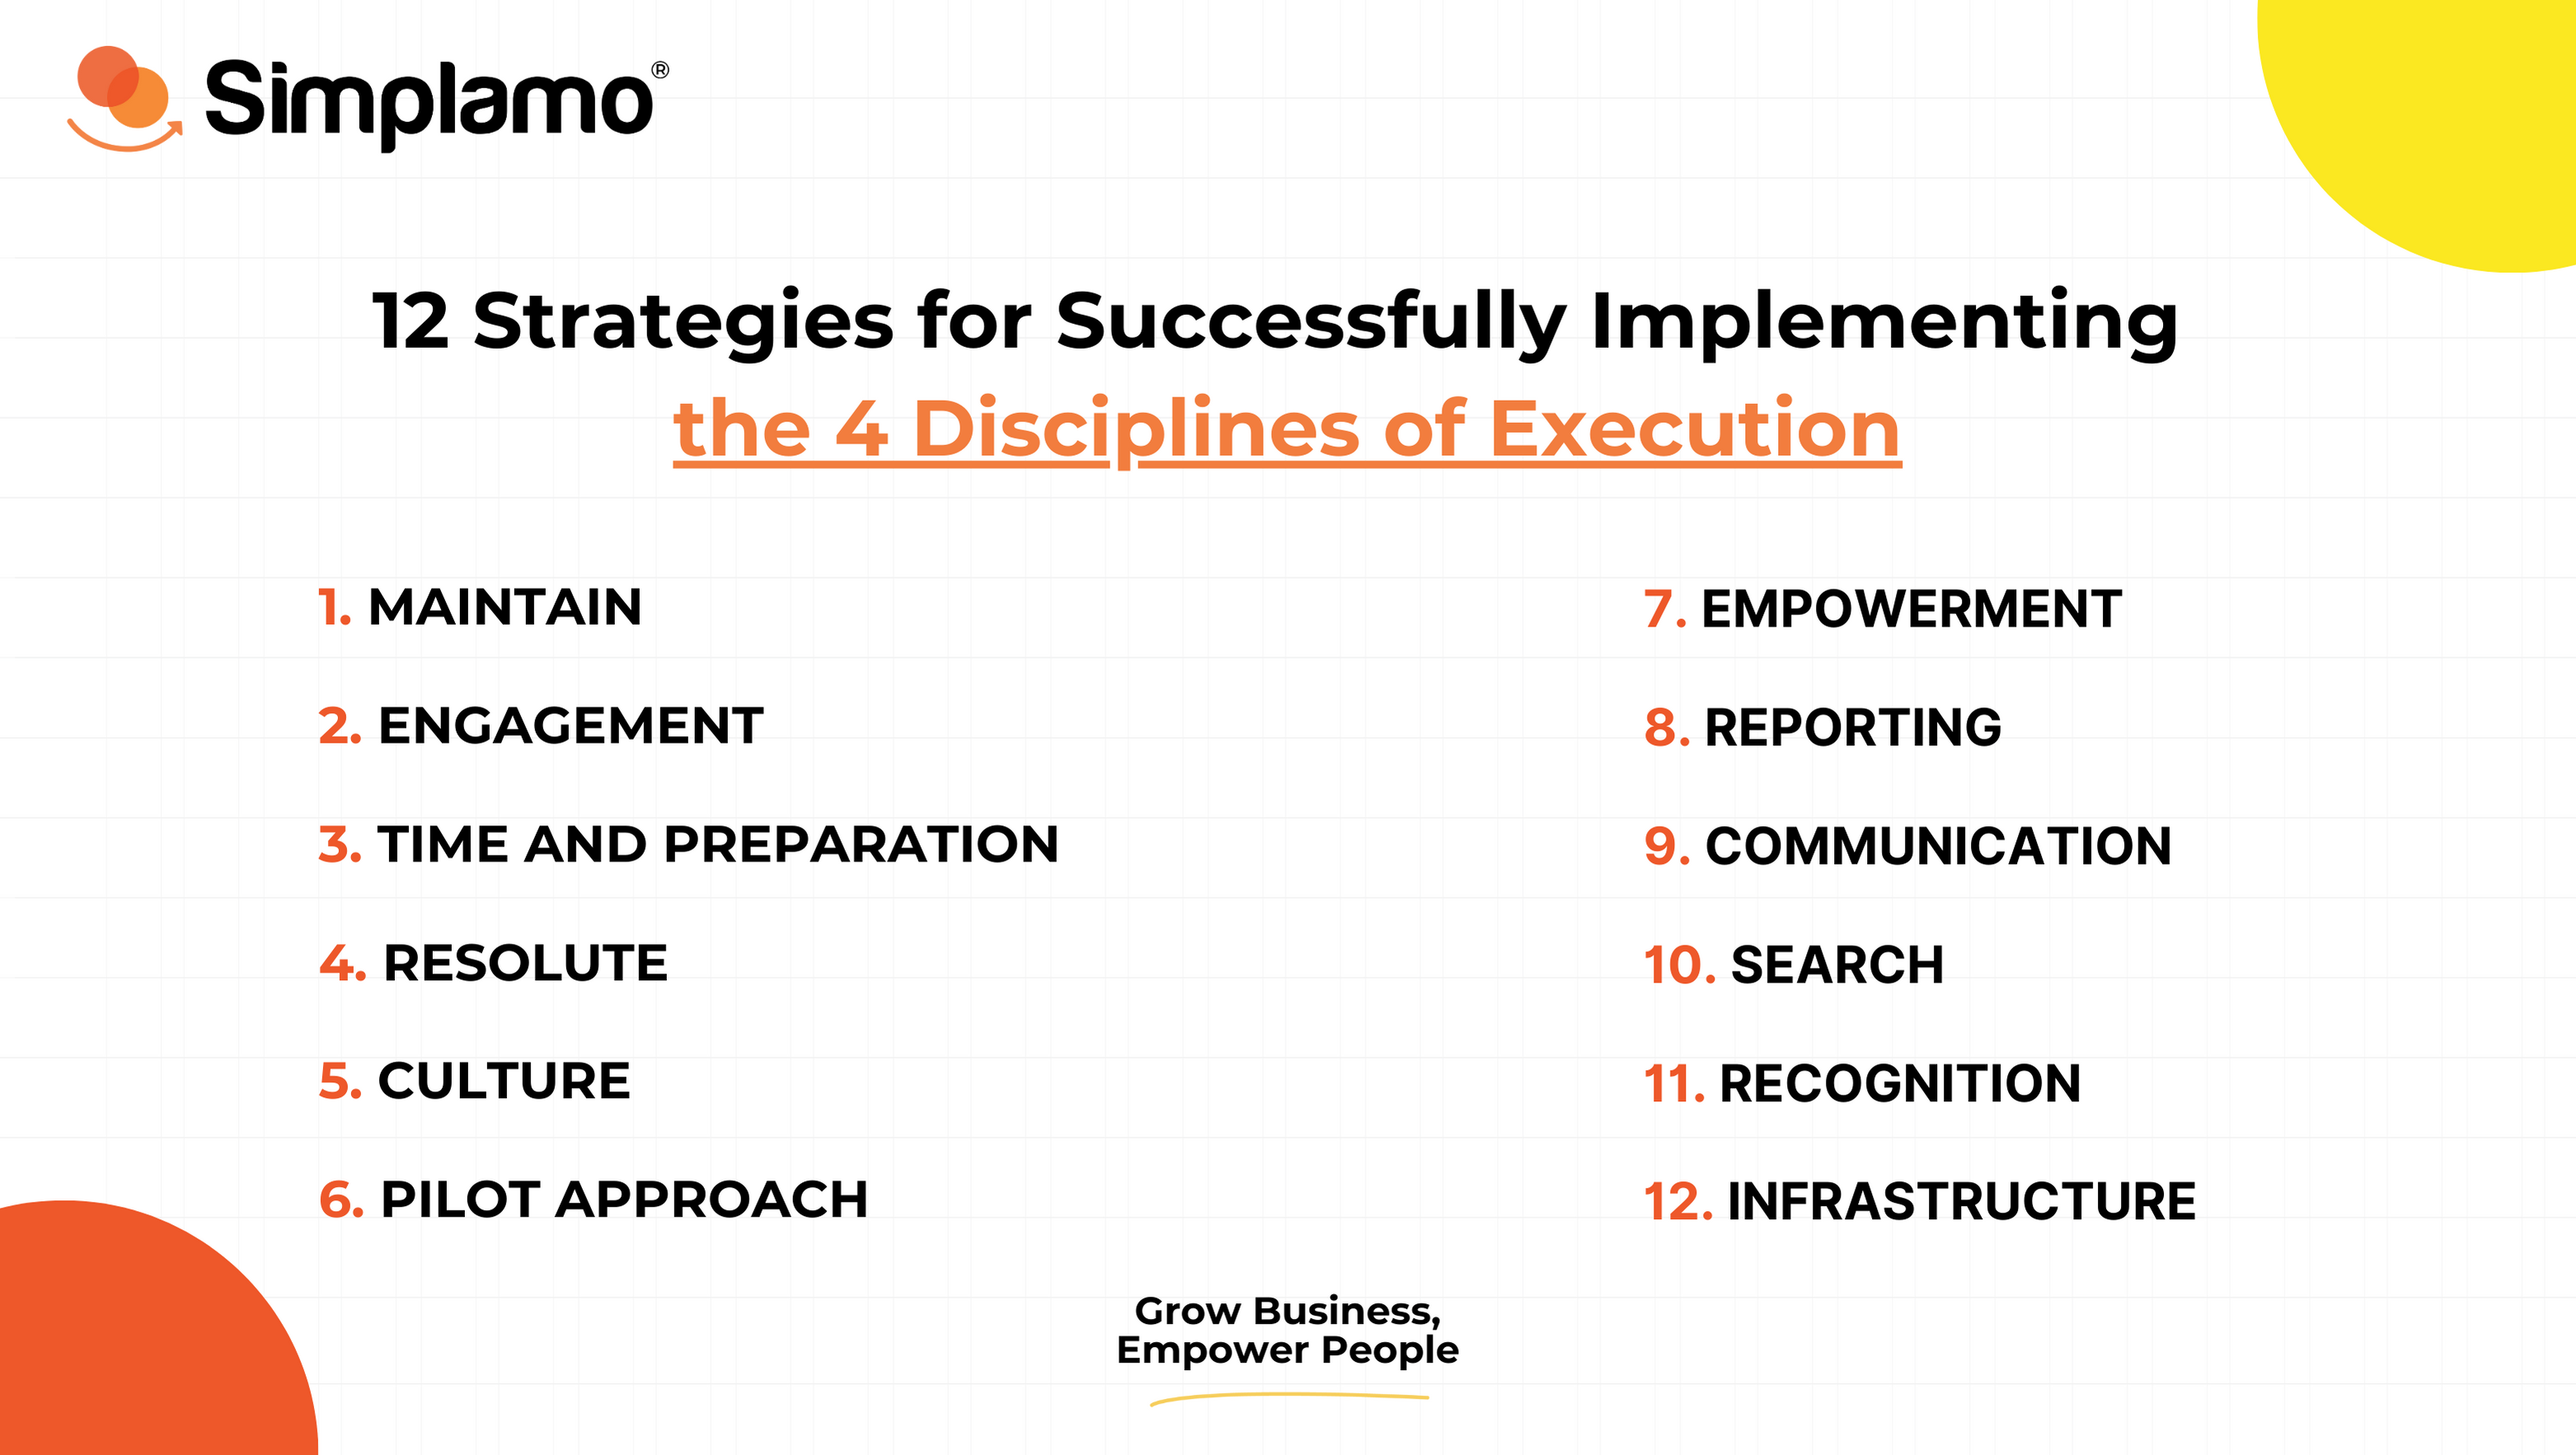 Keys to Successful Implementation of the 4DX